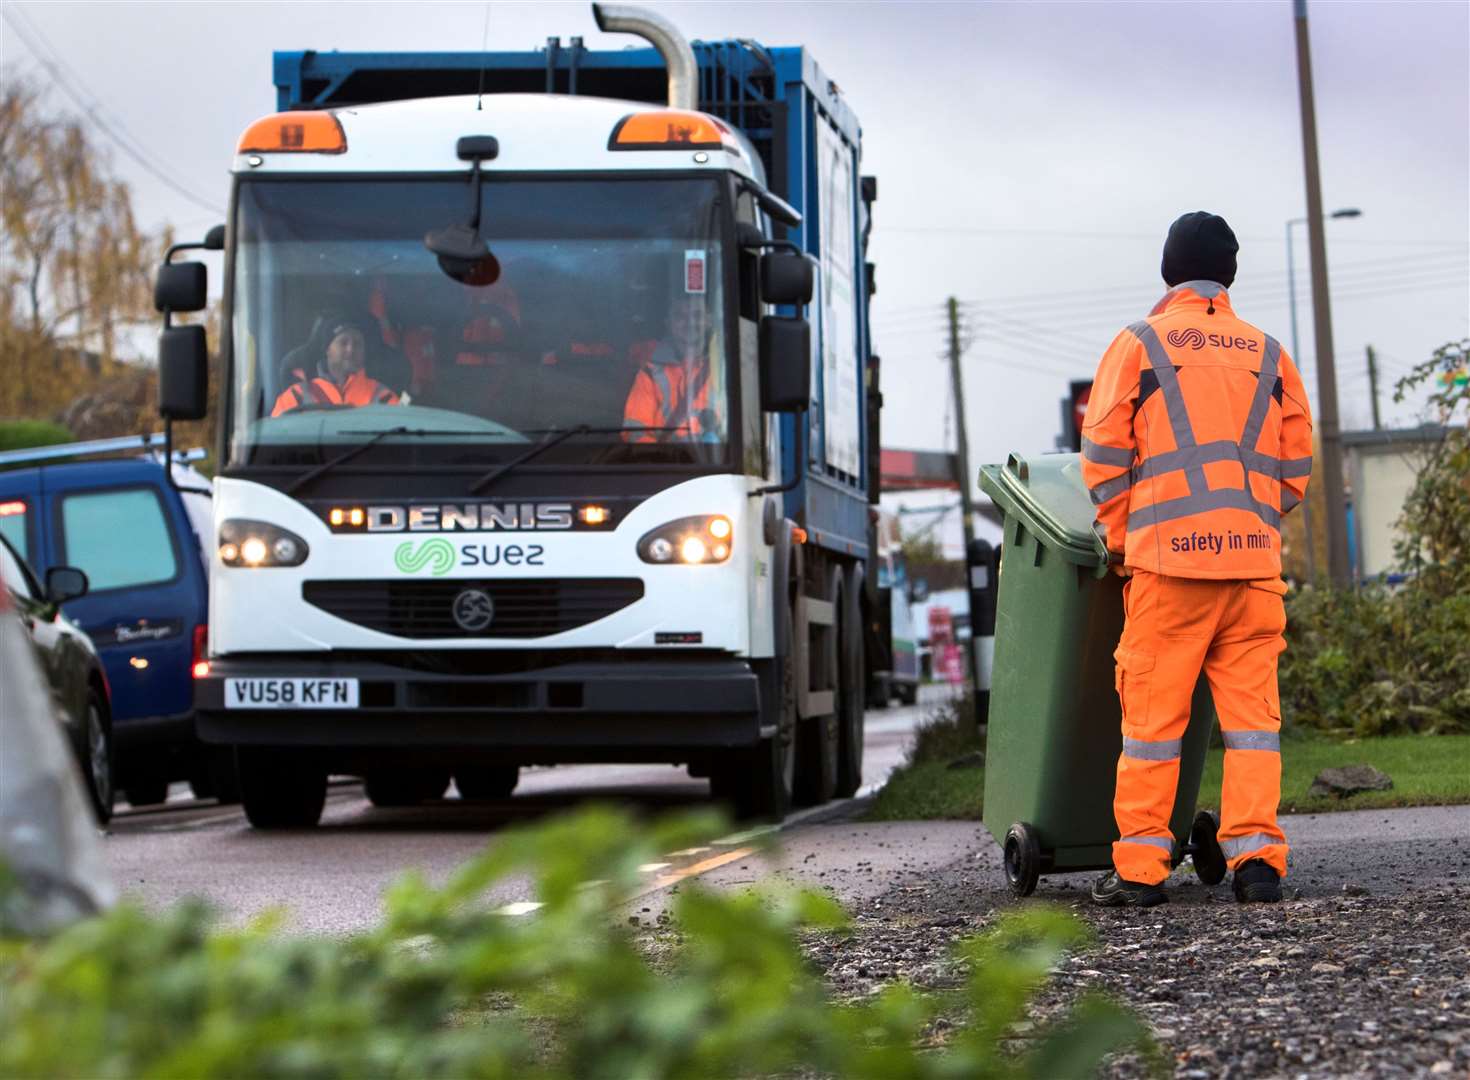 Maidstone has a new waste contractor: SUEZ Recycling & Recovery UK Ltd